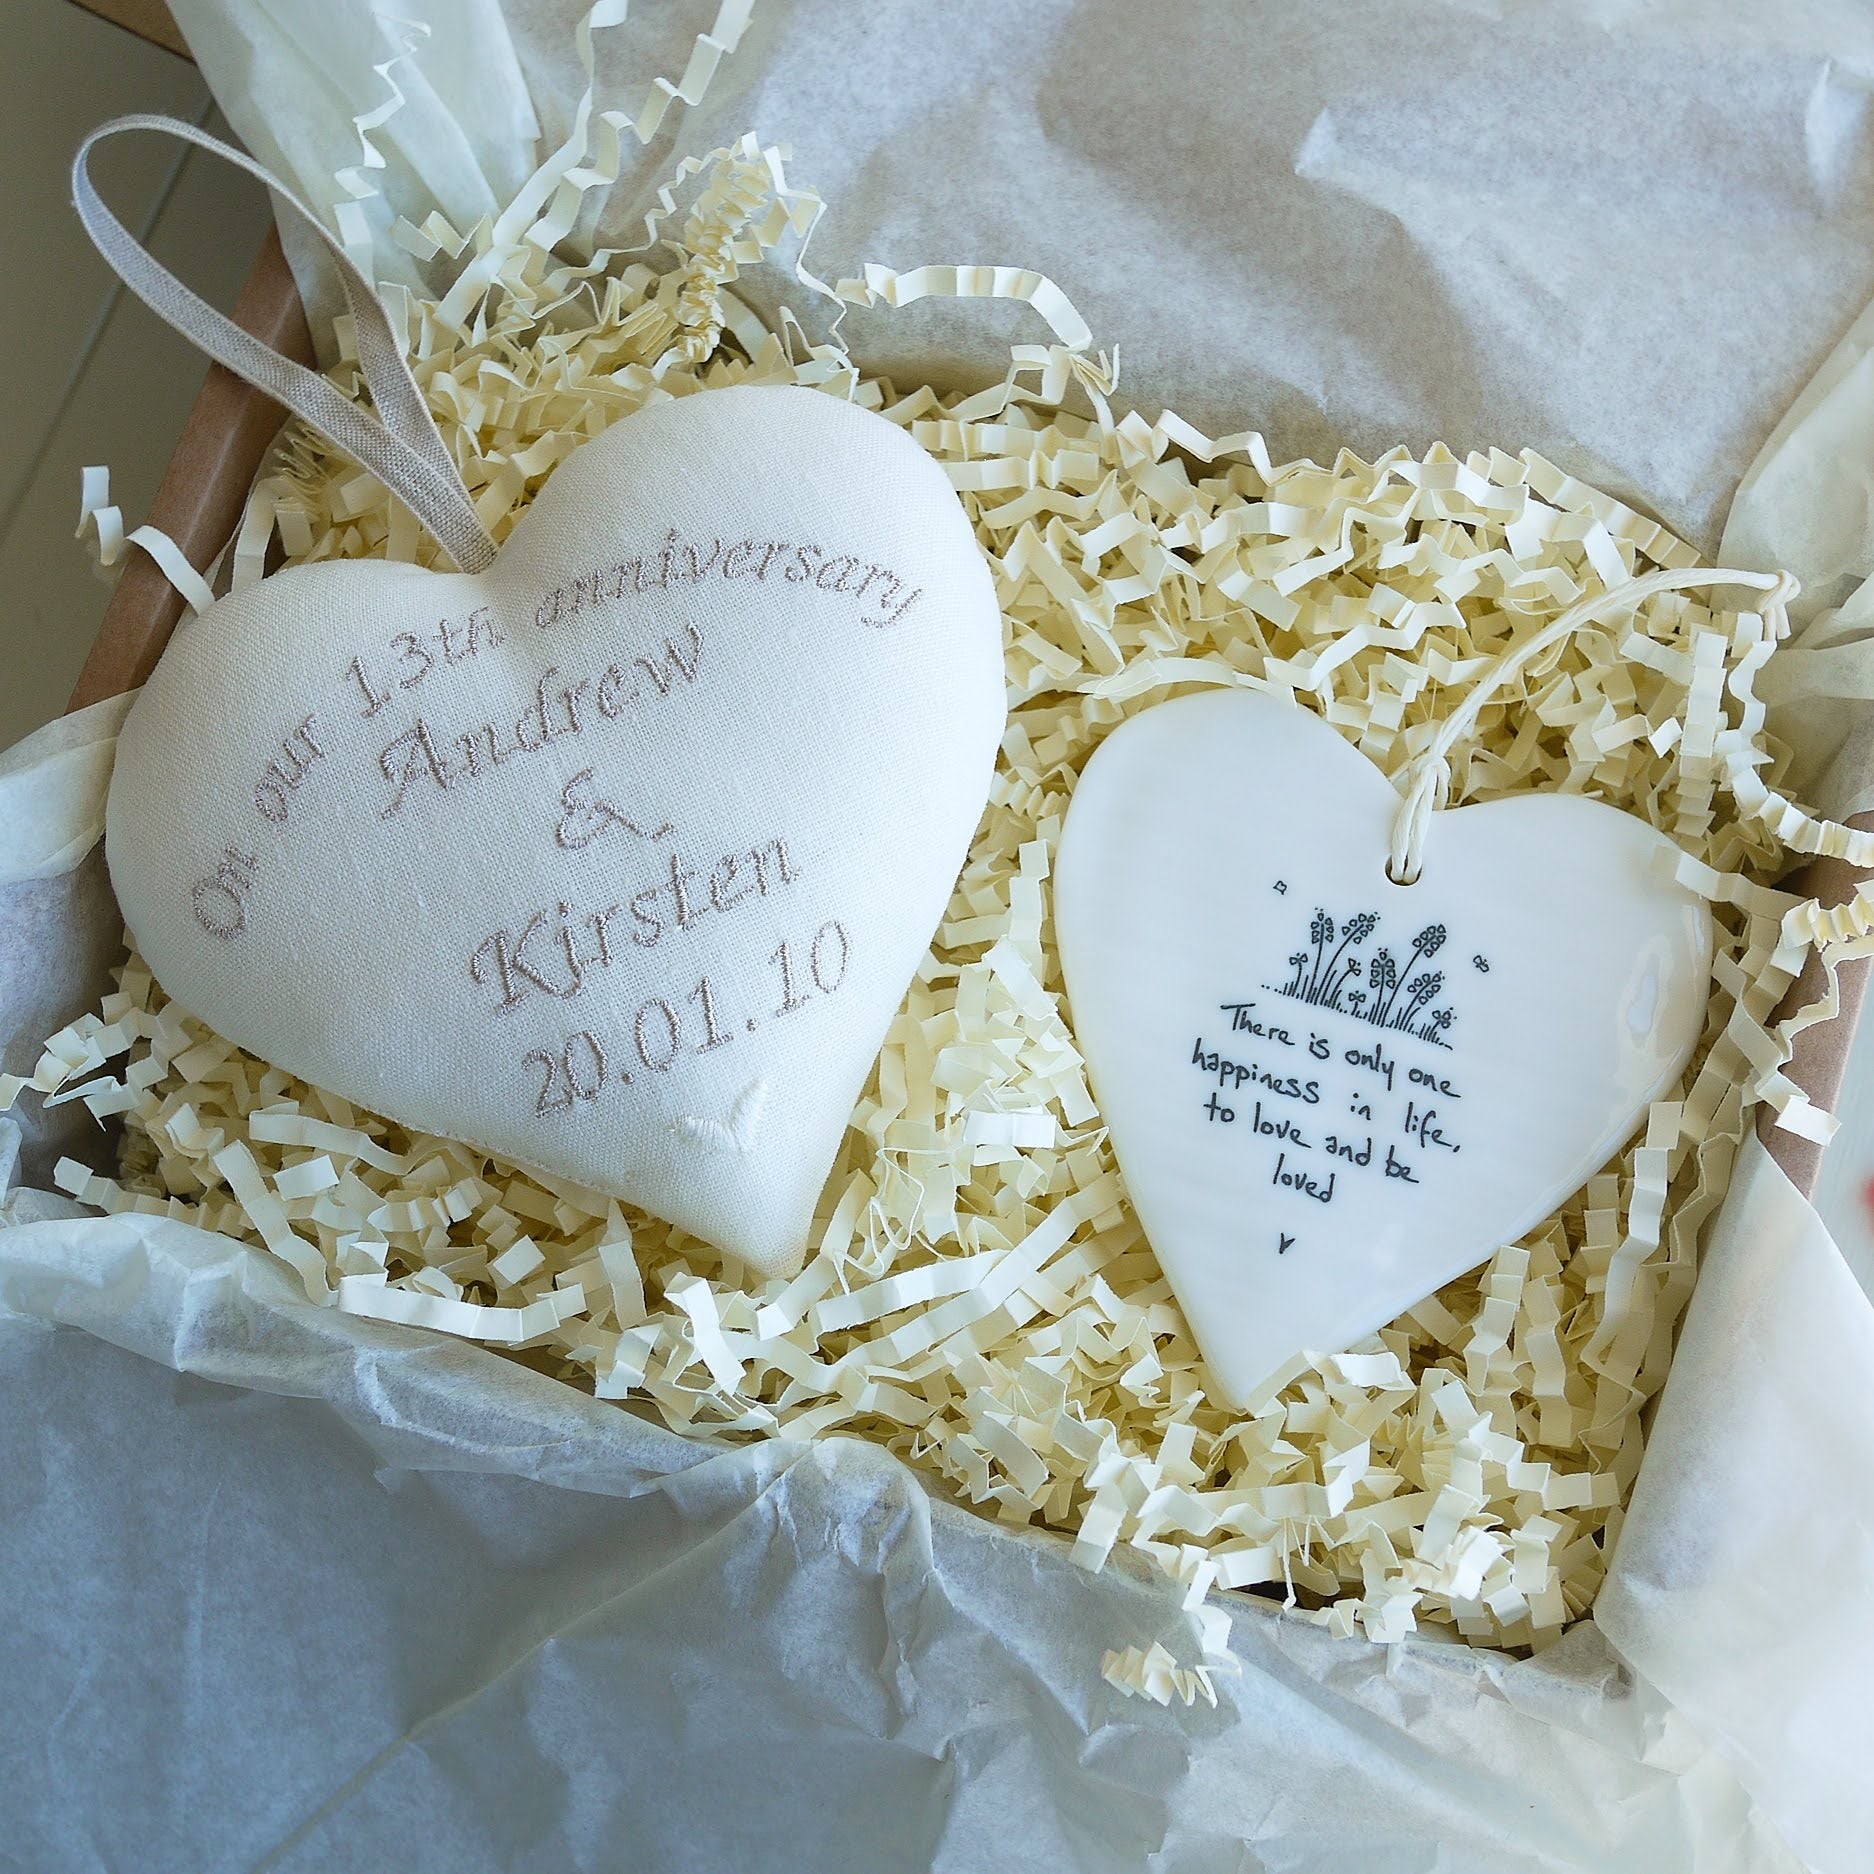 13th Anniversary Personalised Gift Heart with Porcelain Heart Ornament Prep collection